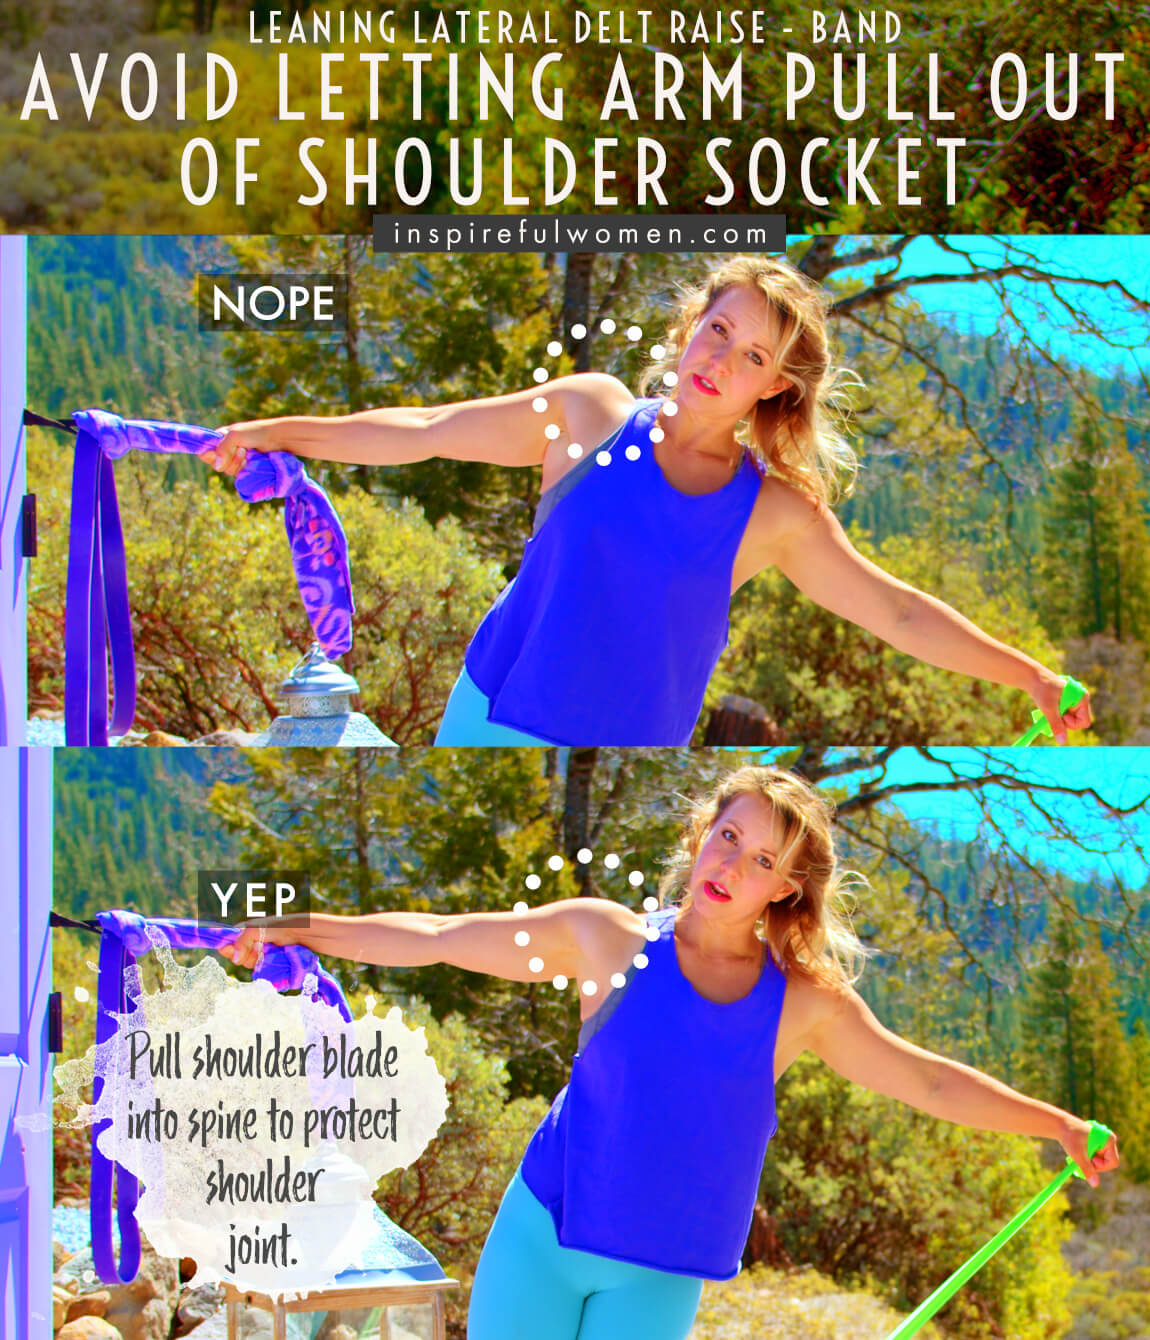 avoid-letting-arm-pull-out-of-shoulder-socket-banded-leaning-lateral-delt-raise-proper-form